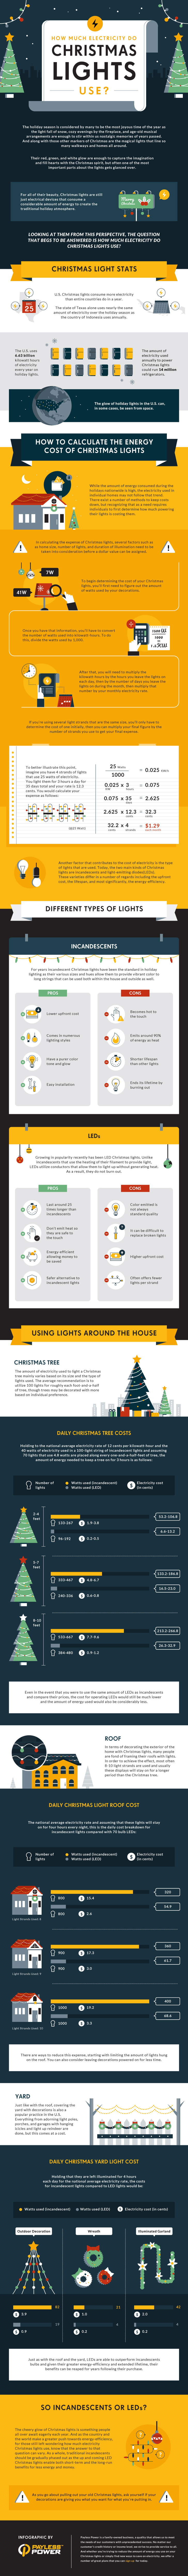 Infographic for How Much Electricity Do Christmas Lights Use?